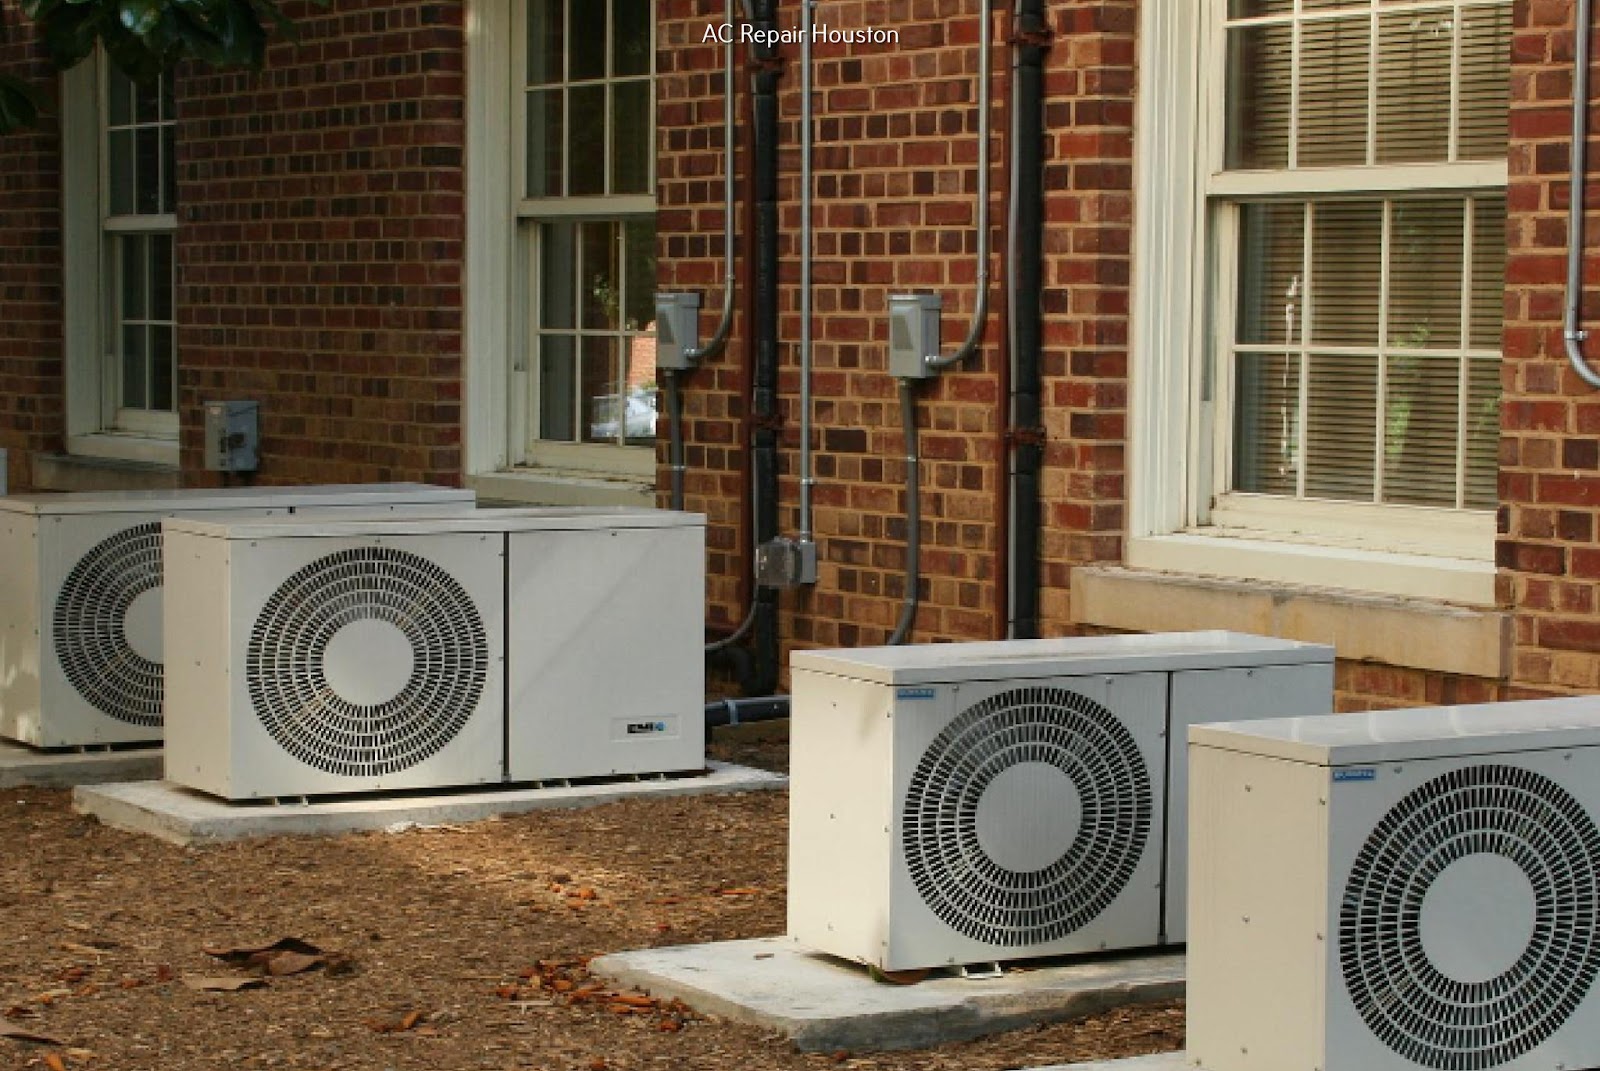 75 Degree AC – Houston AC repair & Installation Outlines Its Services in Houston